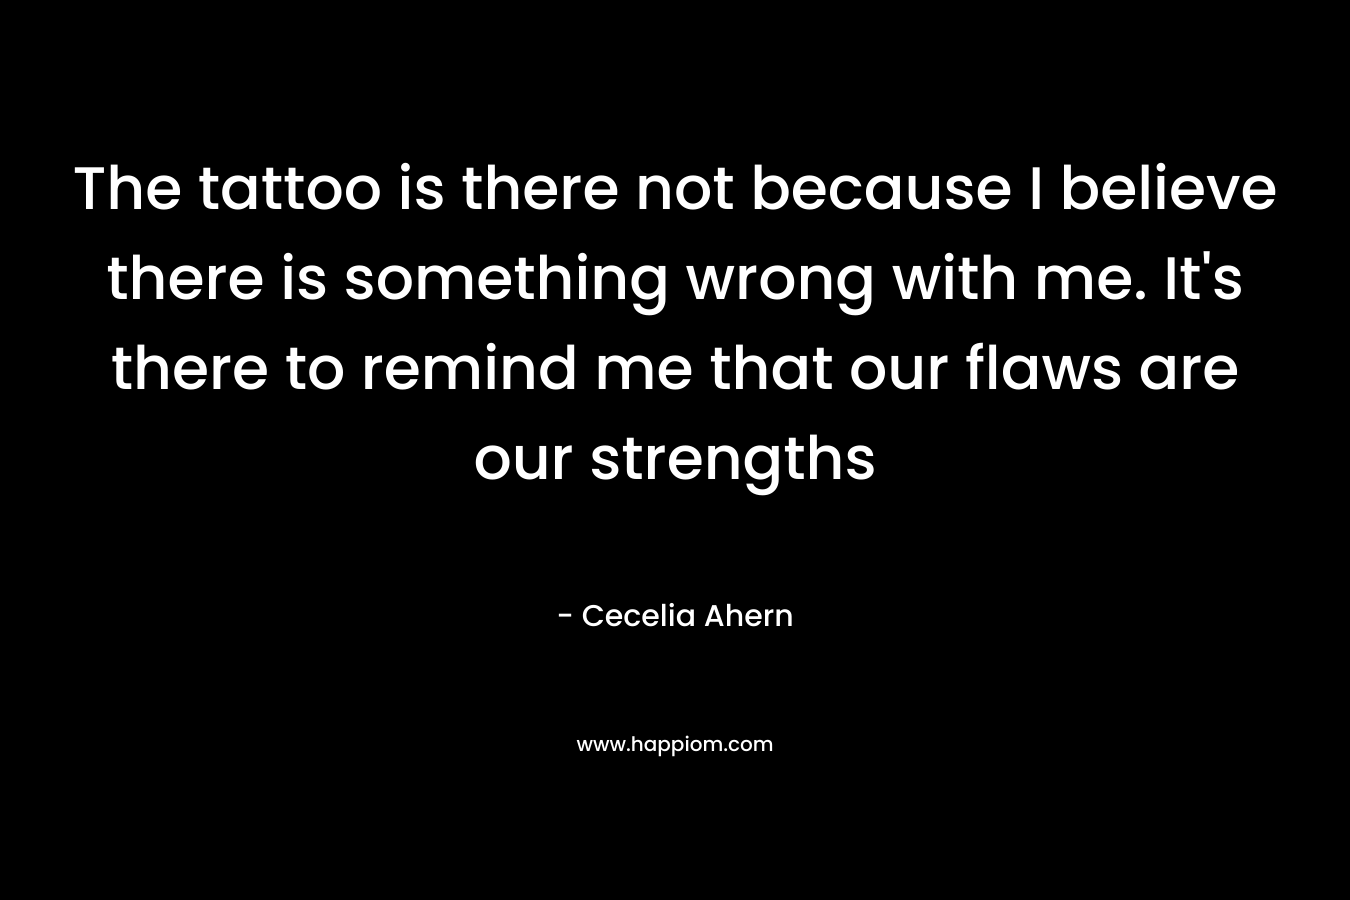 The tattoo is there not because I believe there is something wrong with me. It's there to remind me that our flaws are our strengths